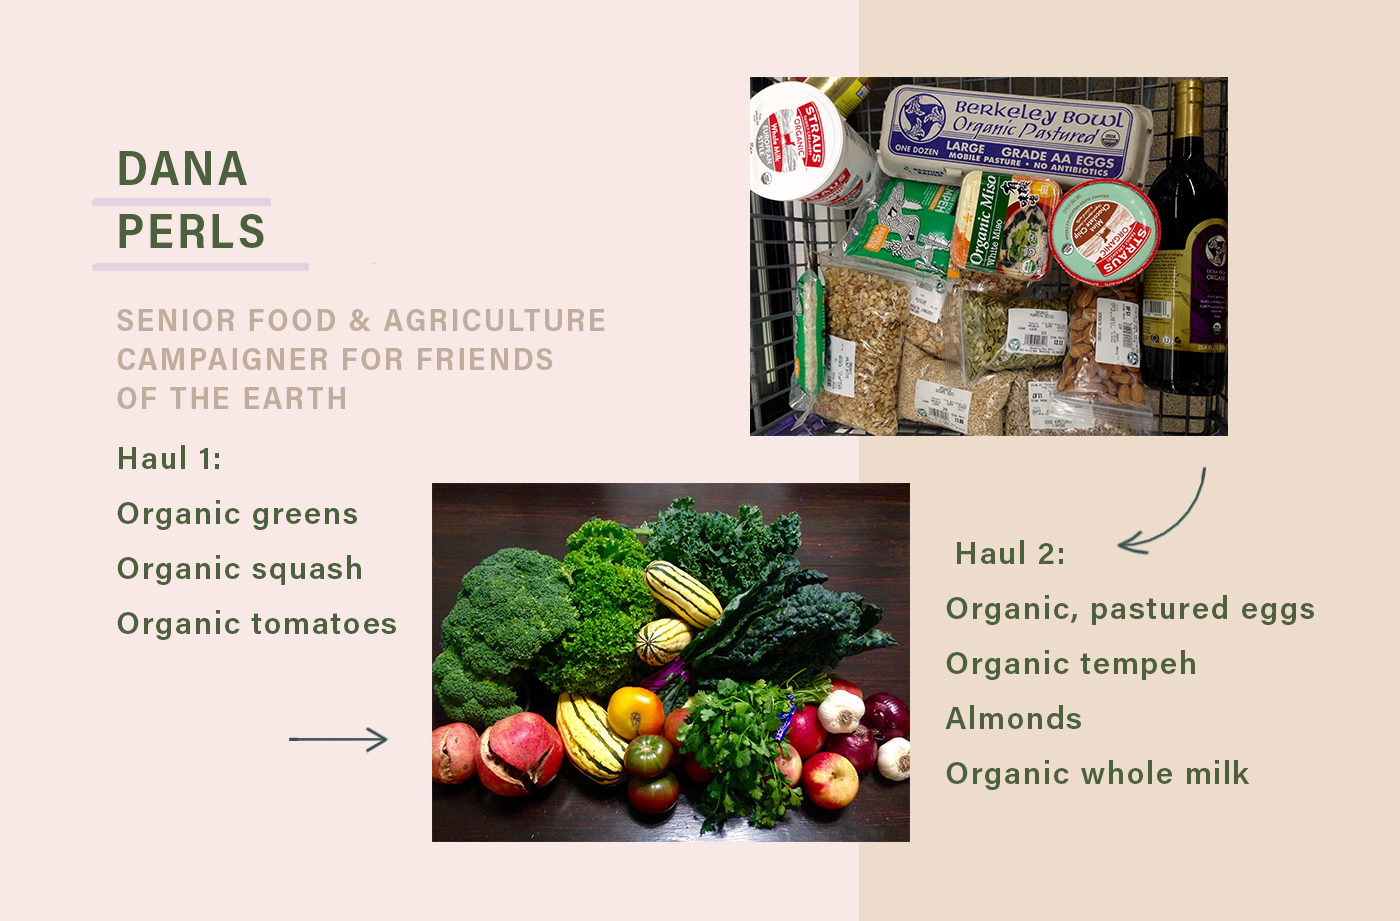 sustainable foods that dana perls adds to grocery cart